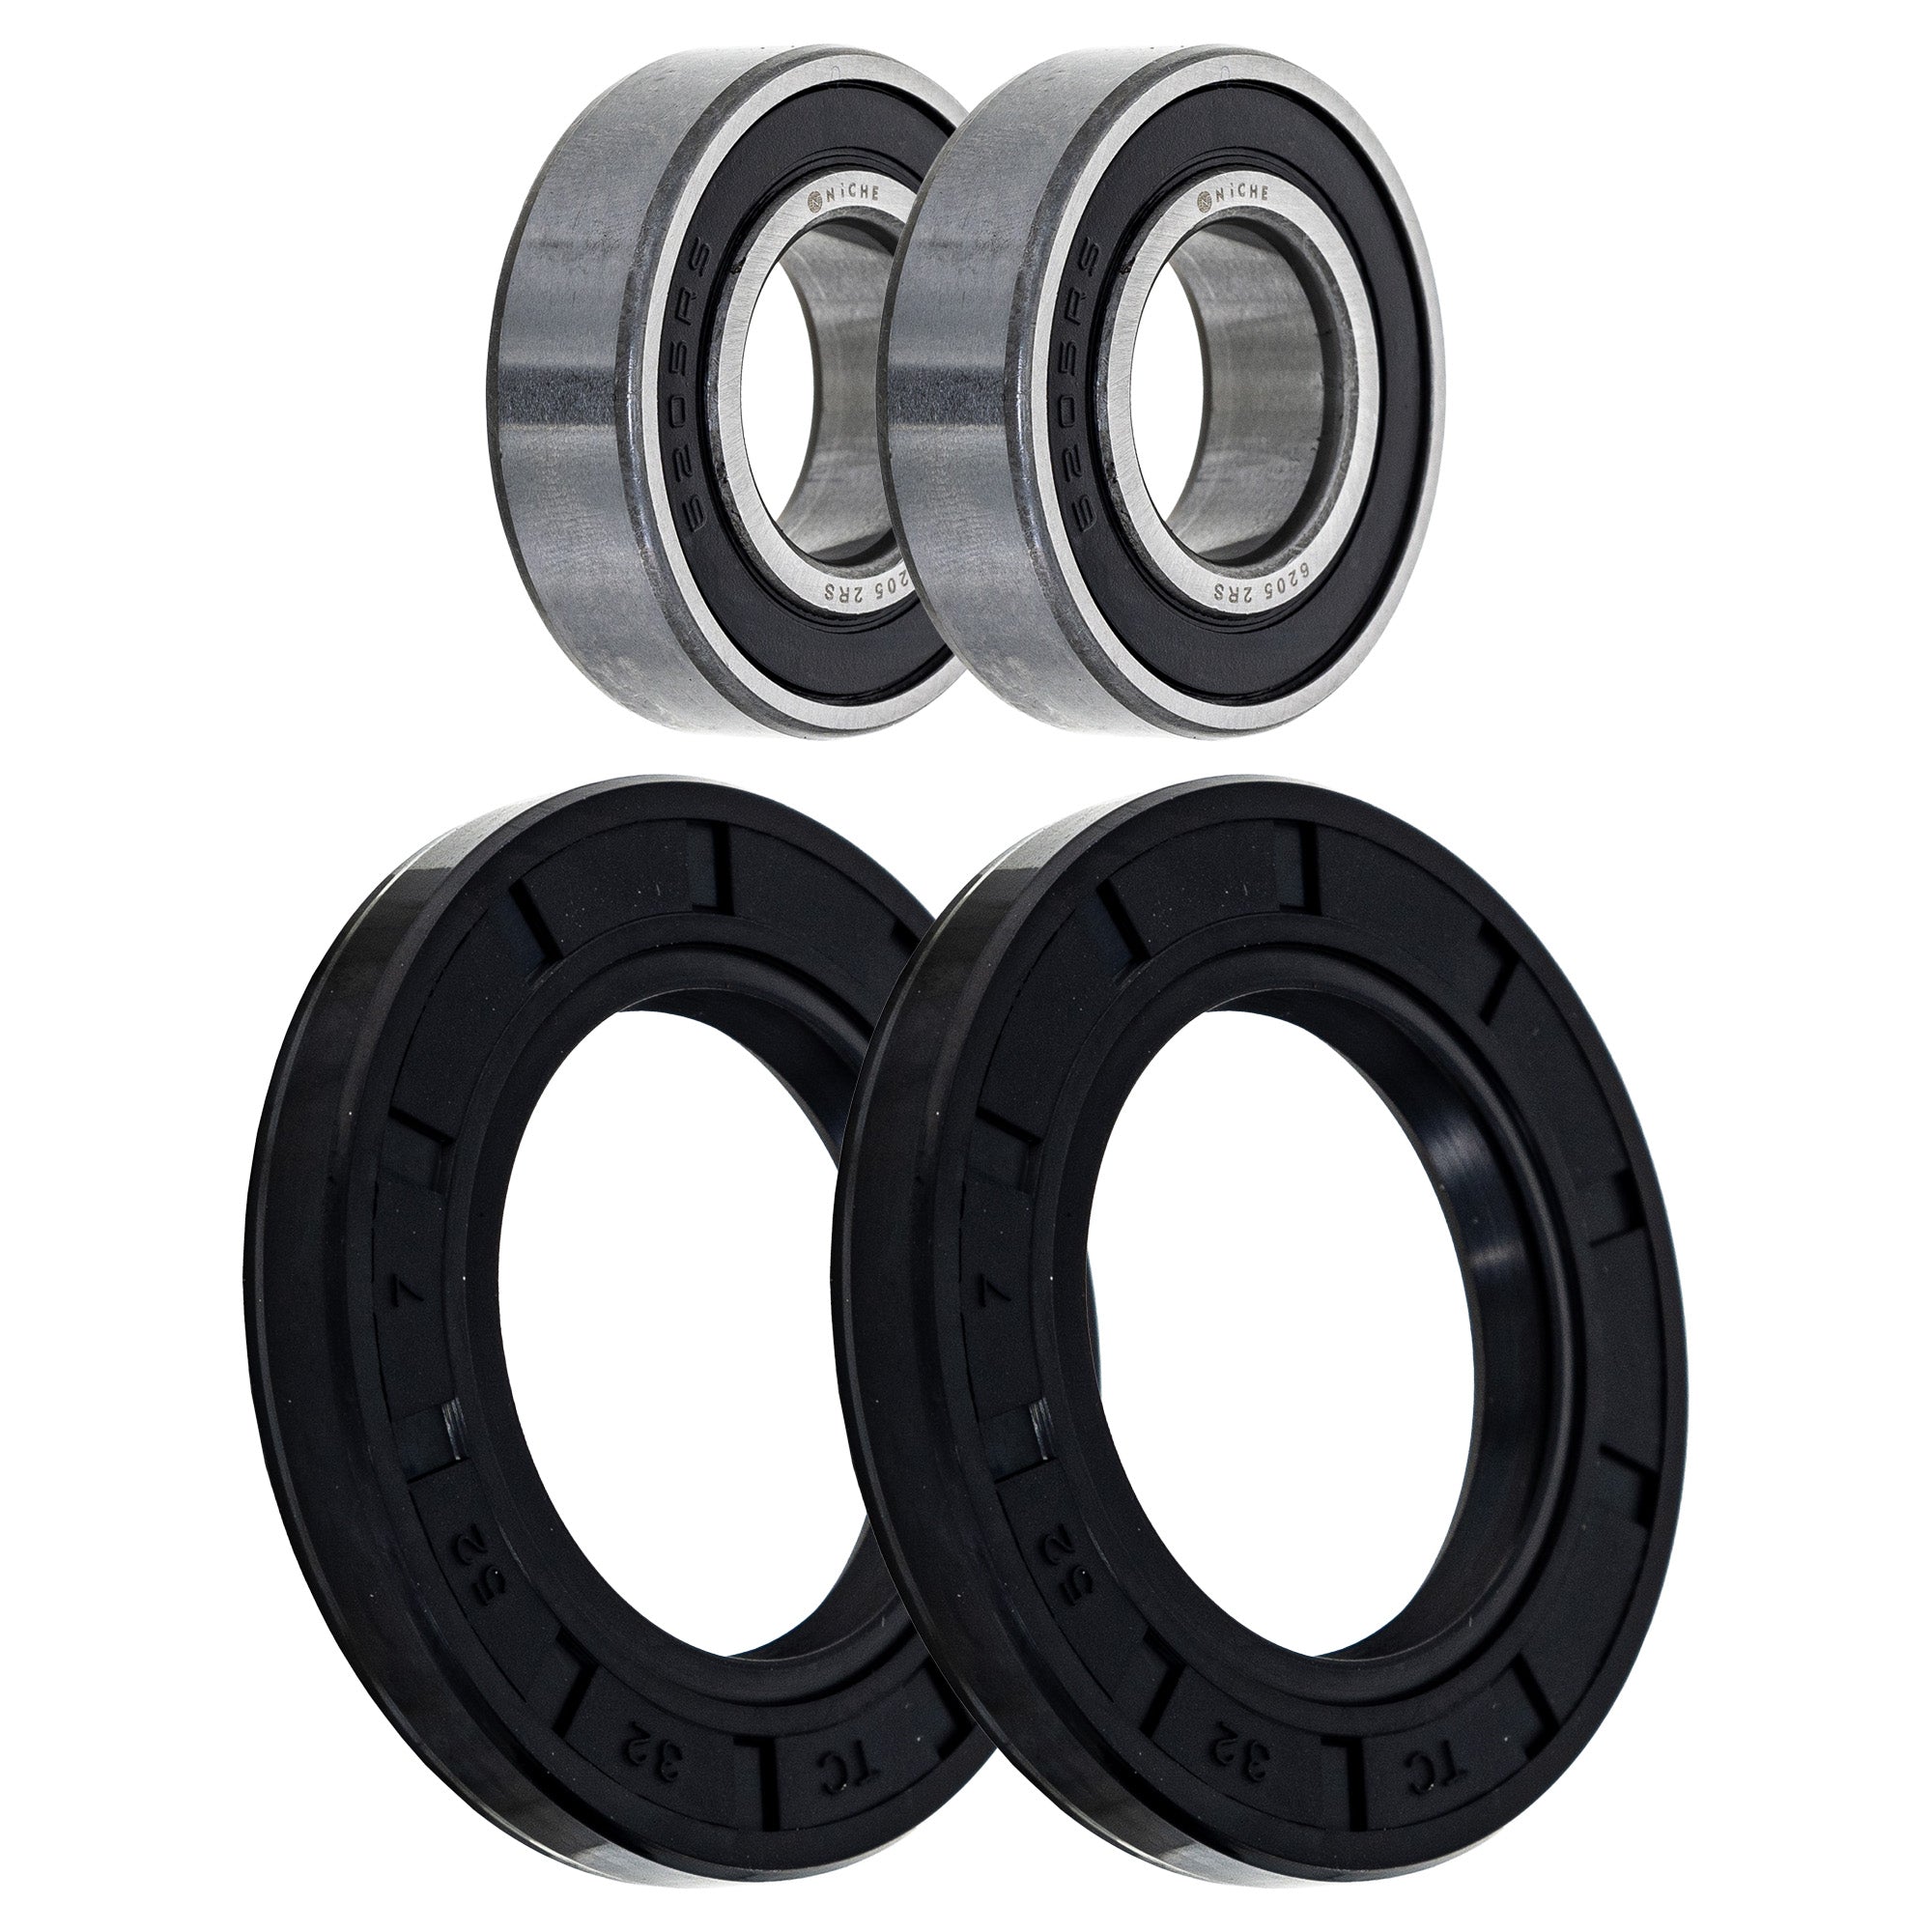 Wheel Bearing Seal Kit for zOTHER Ref No TL1000S TL1000R SV1000S GSXR750 NICHE MK1009138